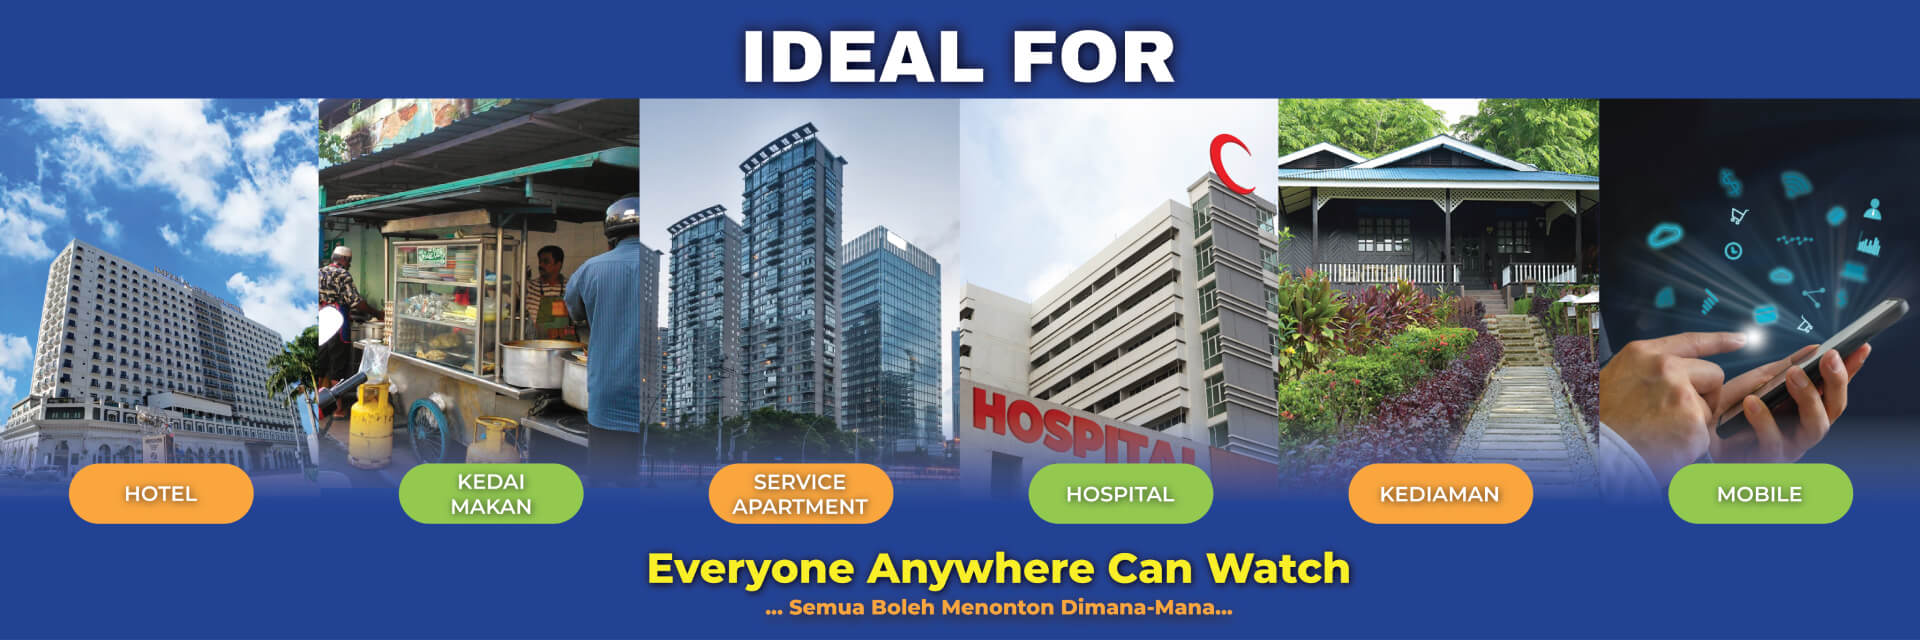 A promotional banner "ideal for" shows images of a hotel, restaurant, serviced apartment, hospital, office, and mobile.